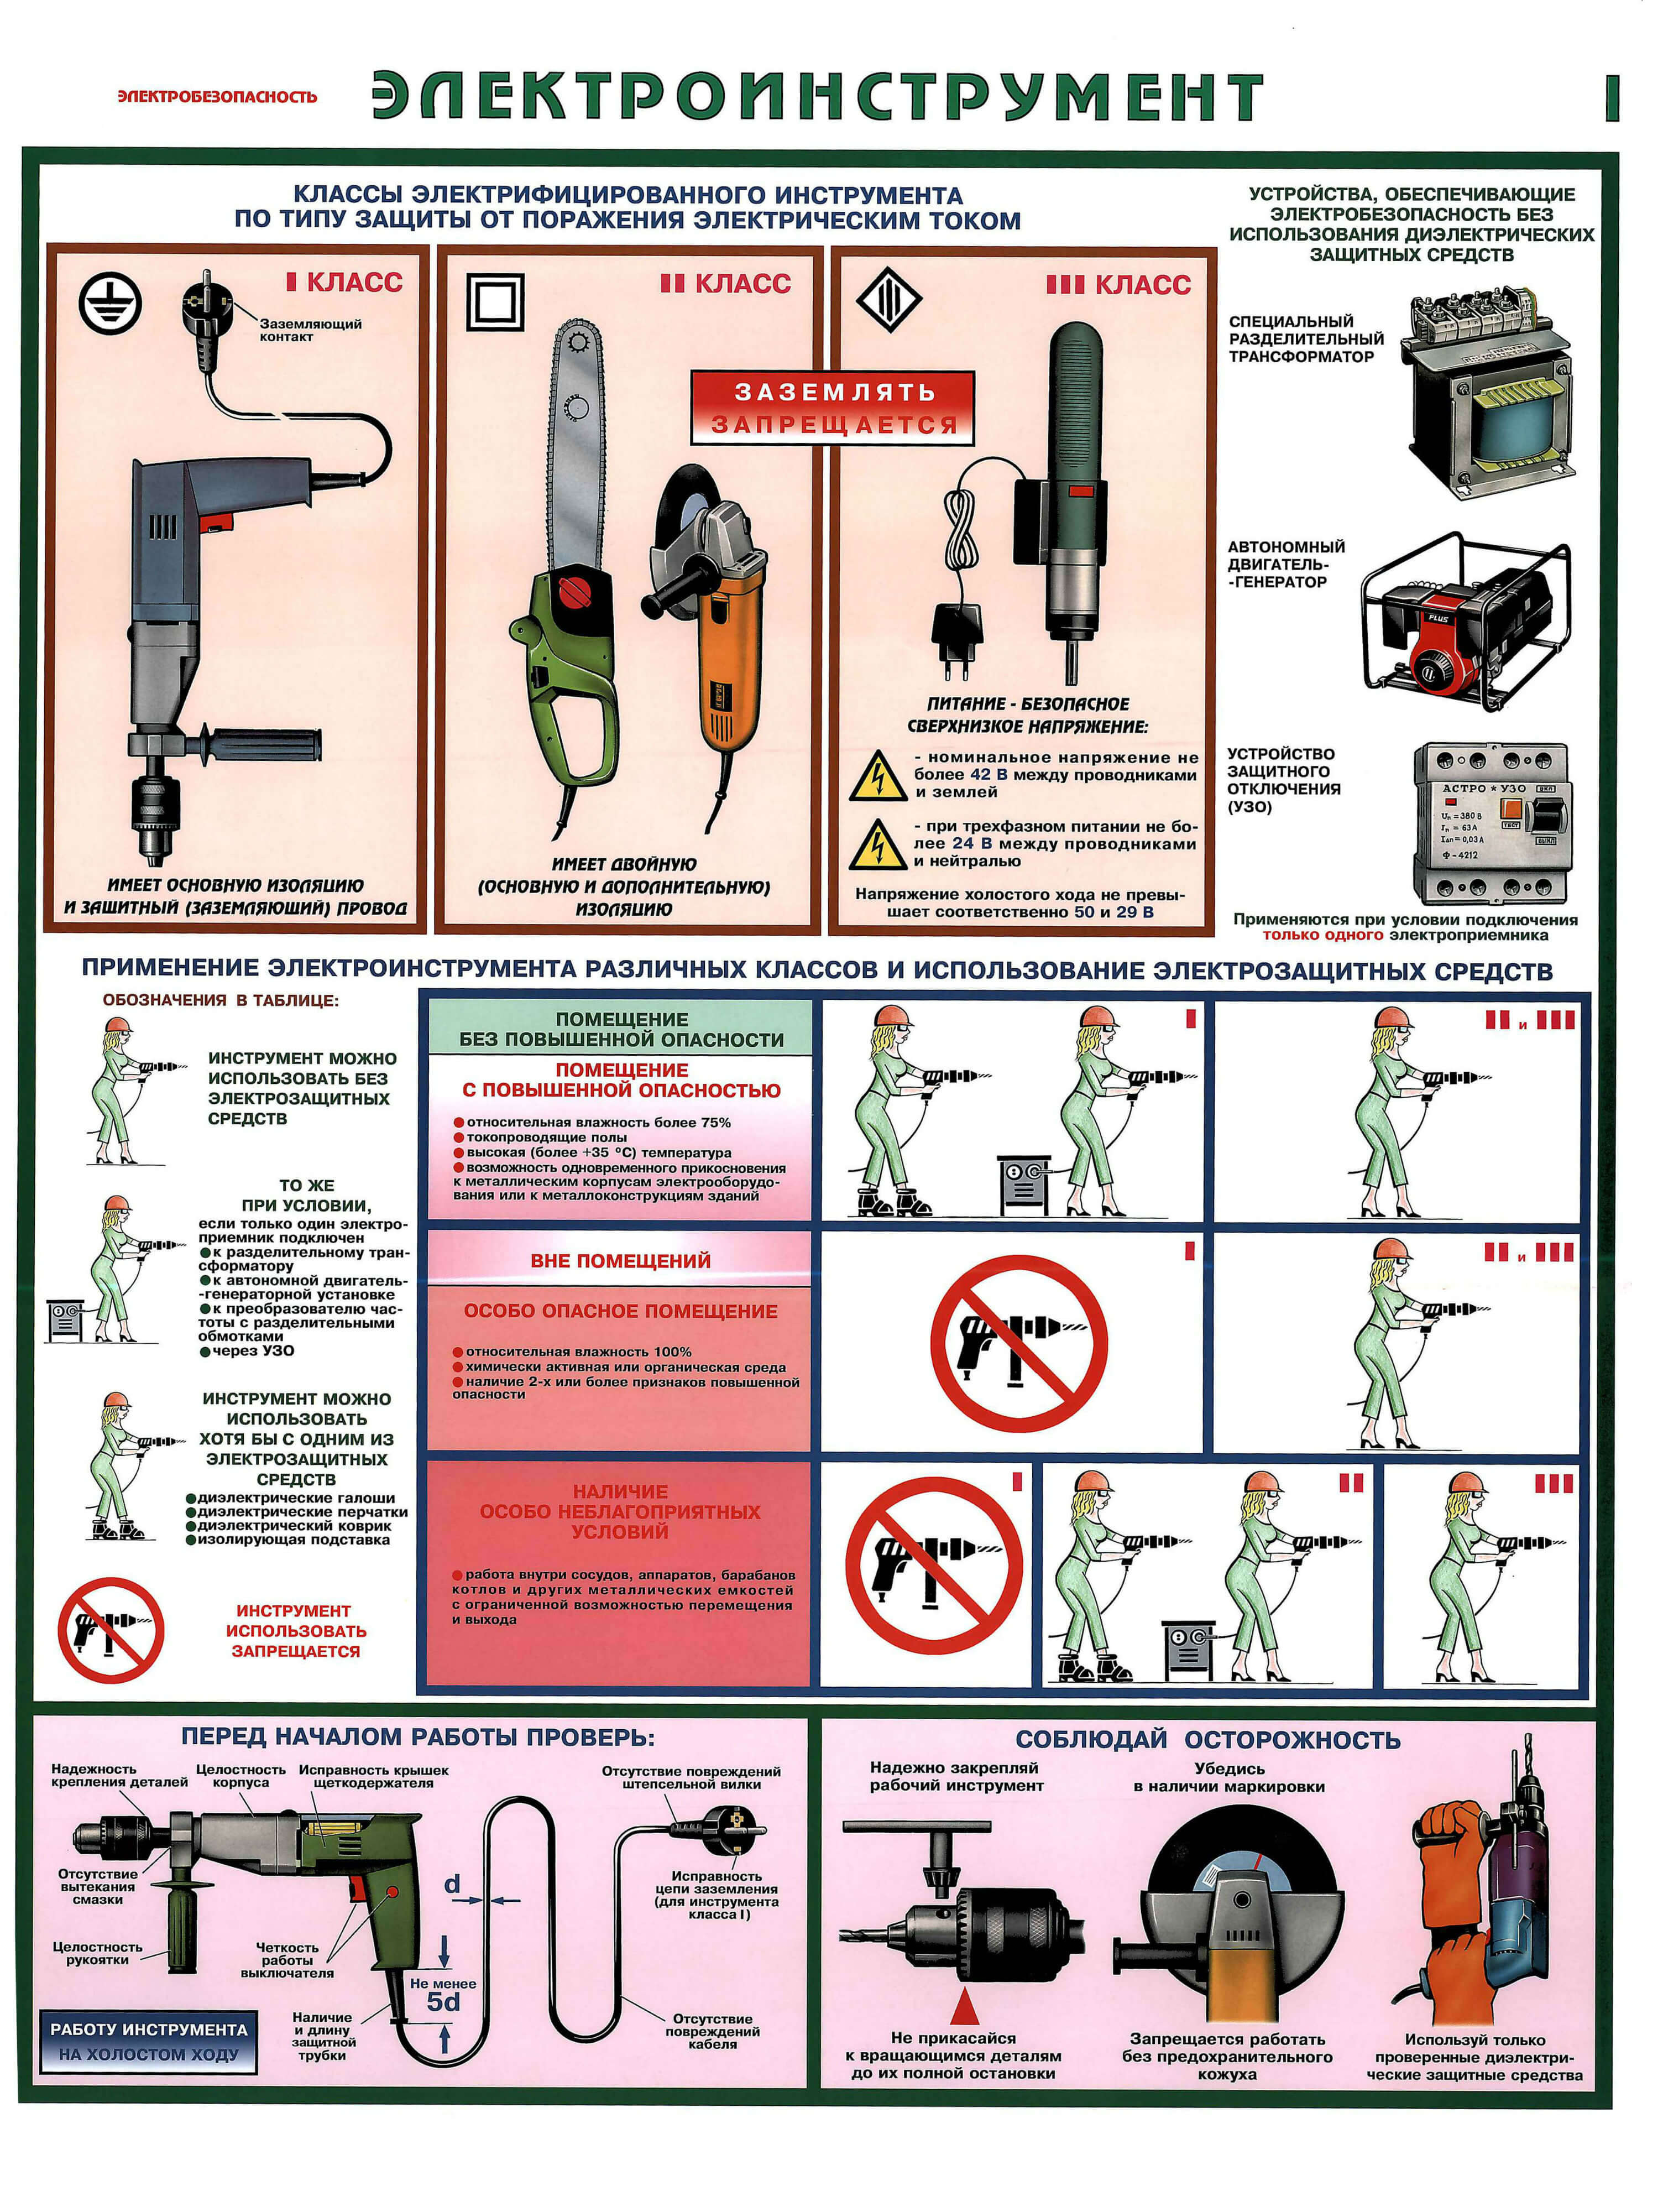 Rules for using a power tool